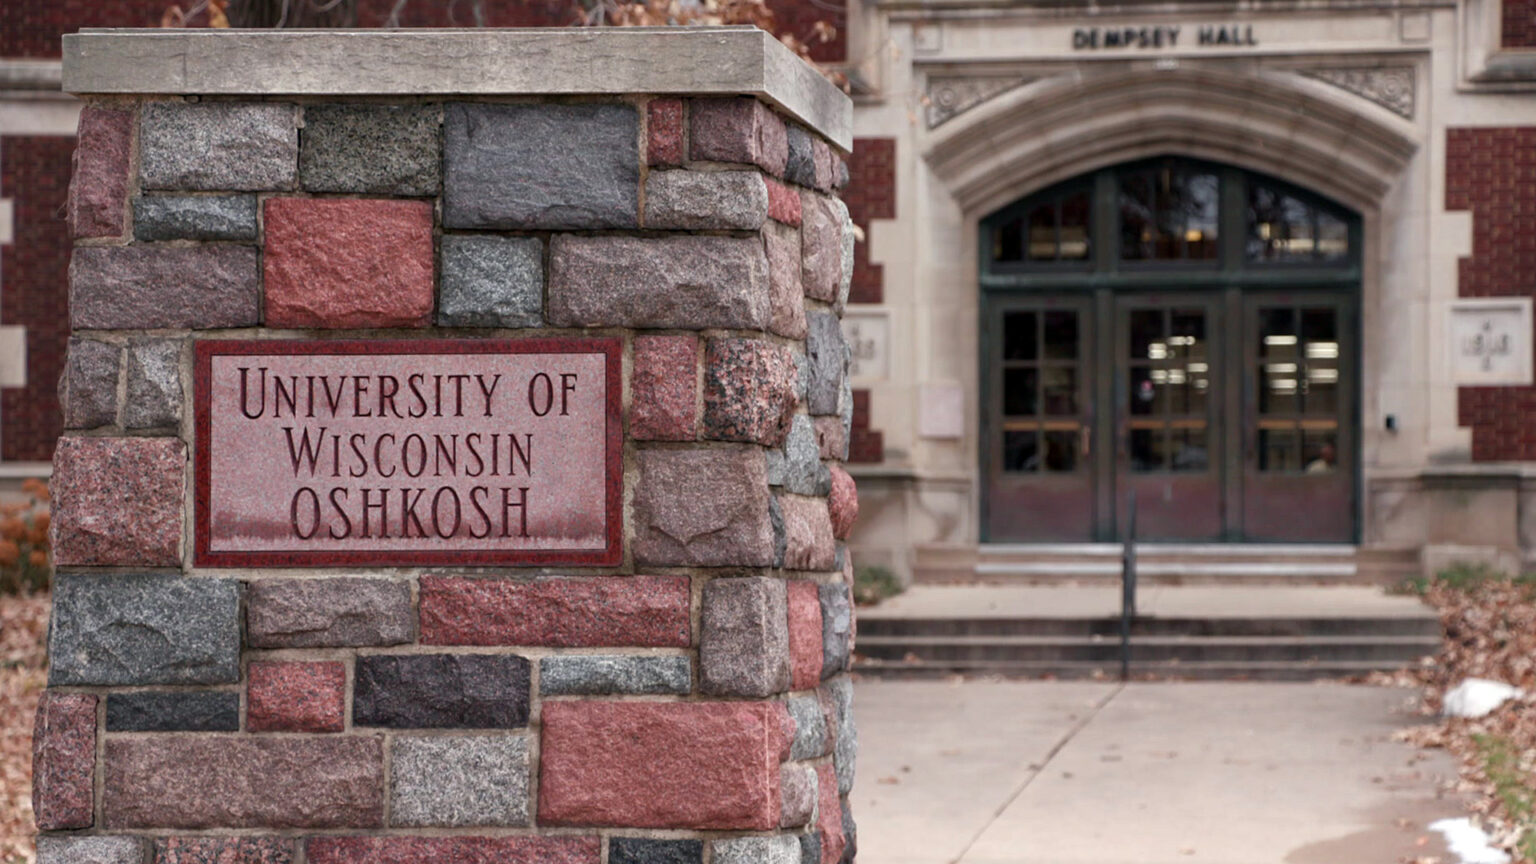 A carved stone sign reading University of Wisconsin Oshkosh is embedded among paving stones on the exterior of a pillar that stands outside a brick and masonry building with a sign above an arched entrance that reads Dempsey Hall.